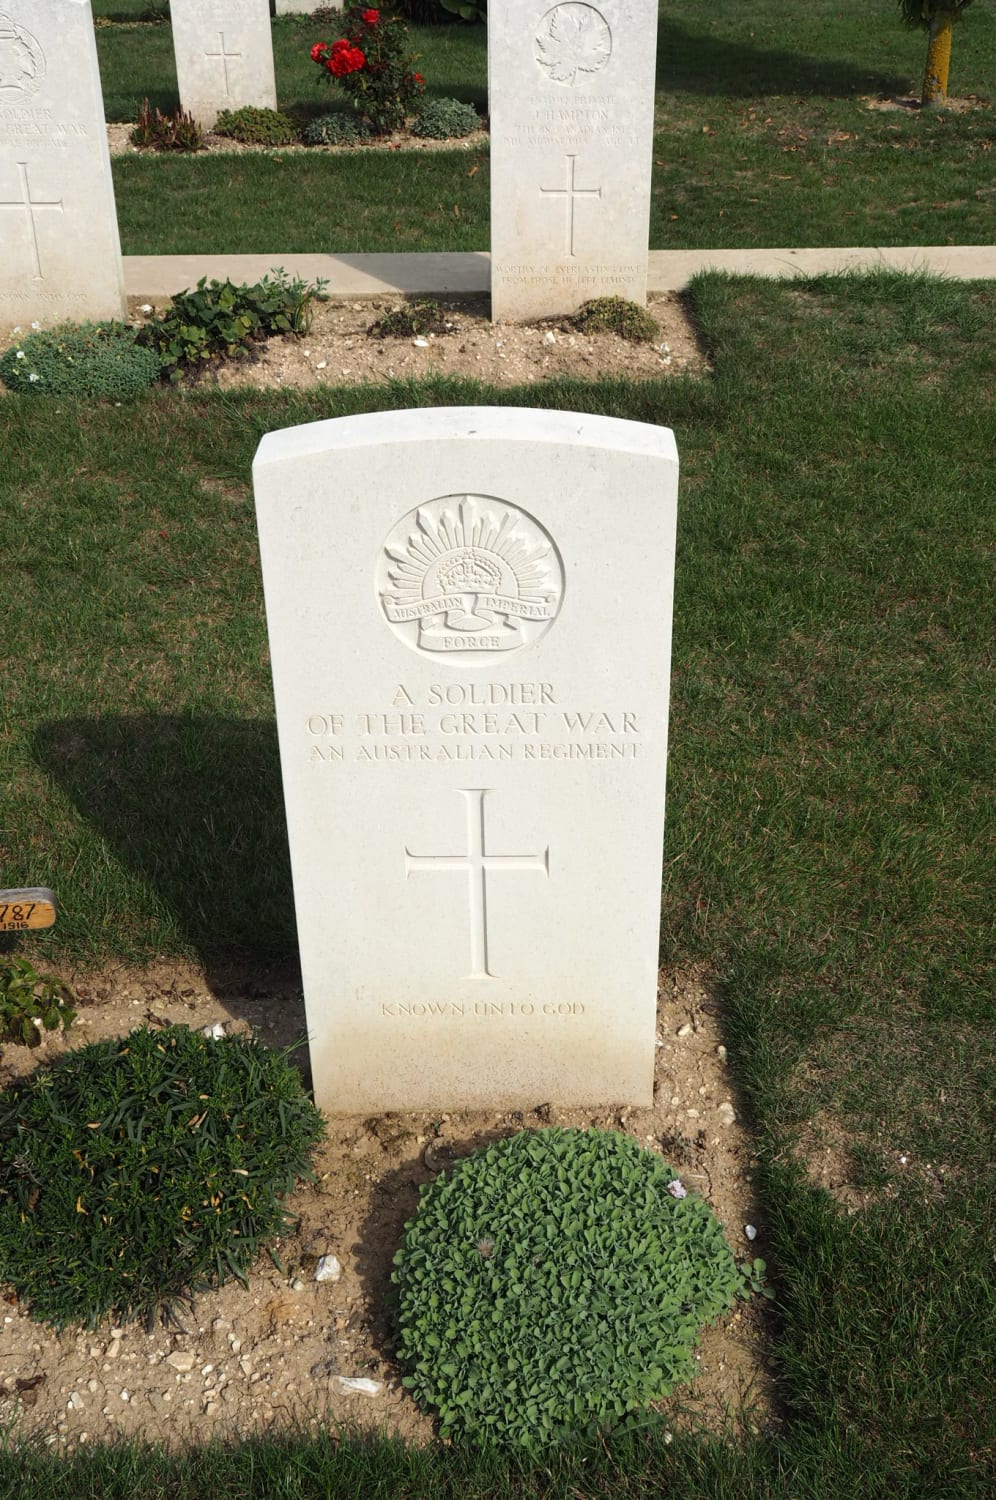 Villers-Bretonneux Military Cemetery in northern France